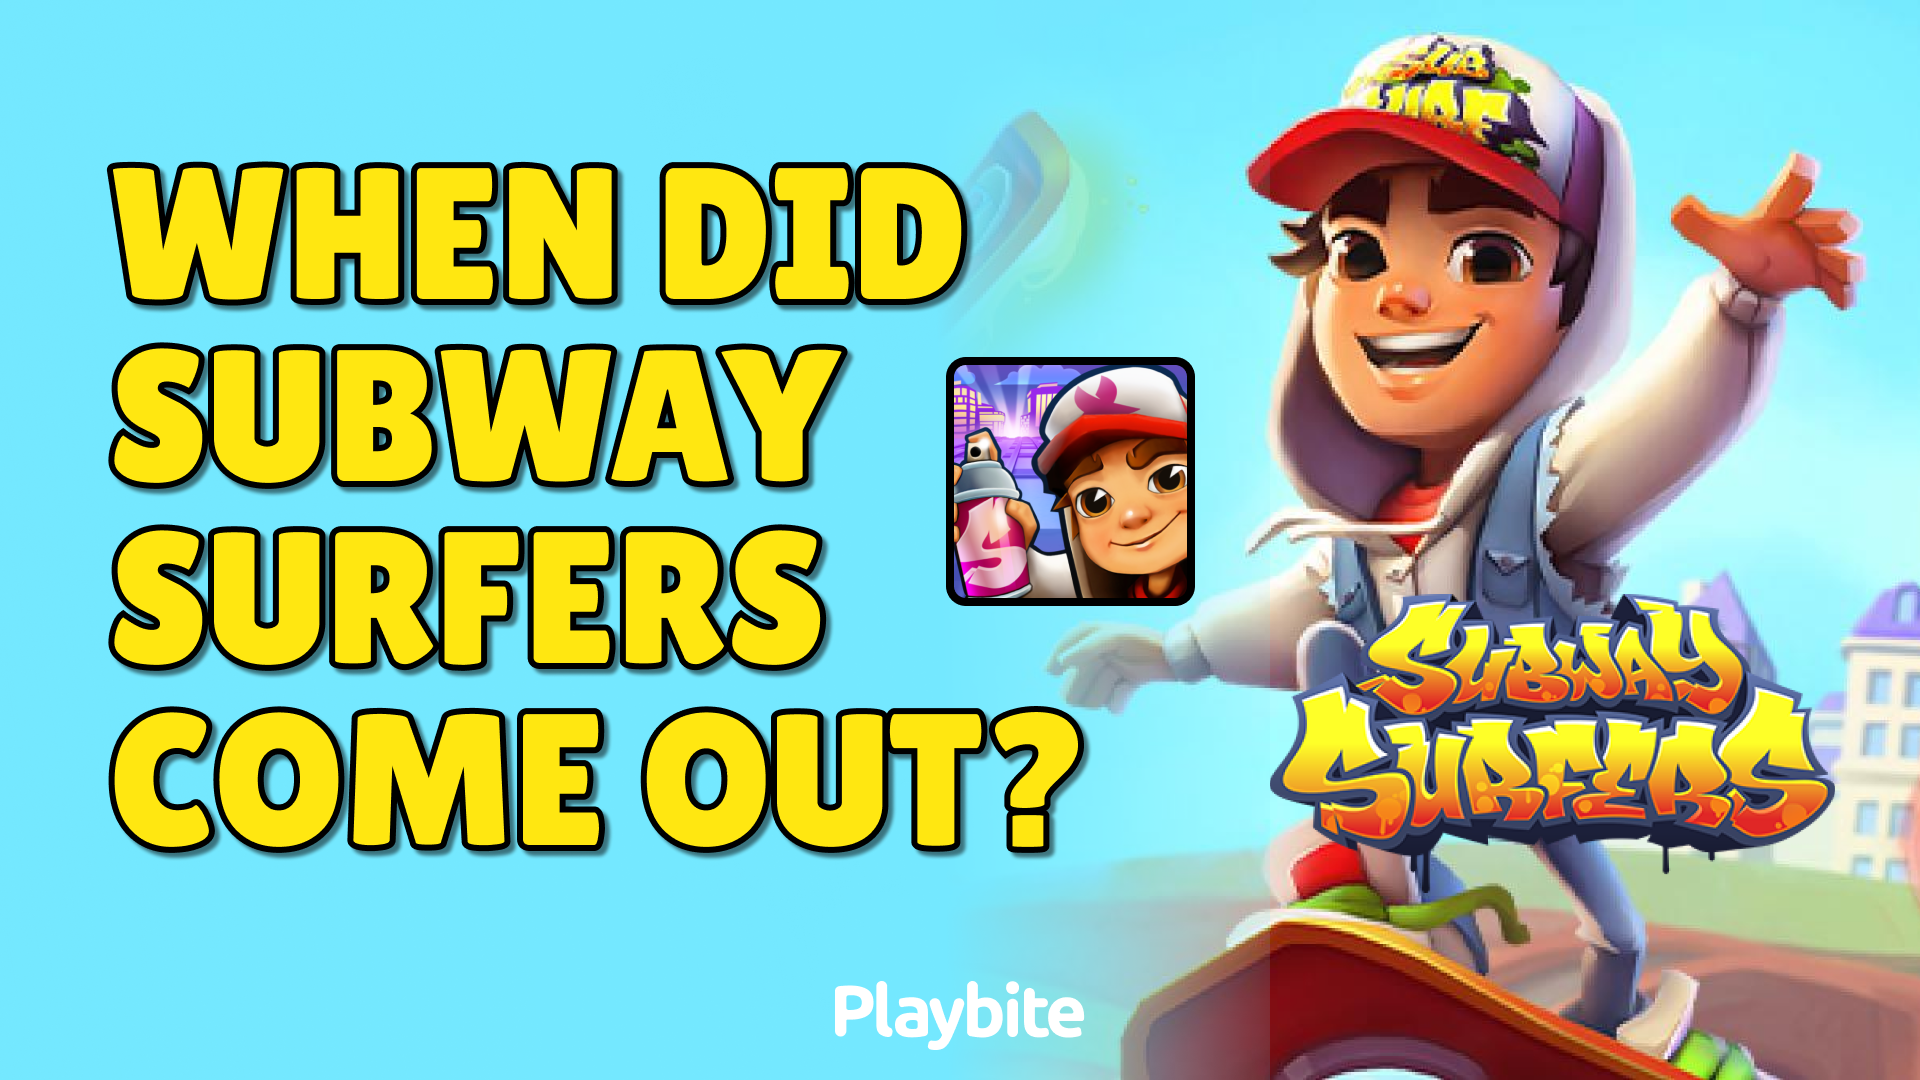 How long is Subway Surfers?